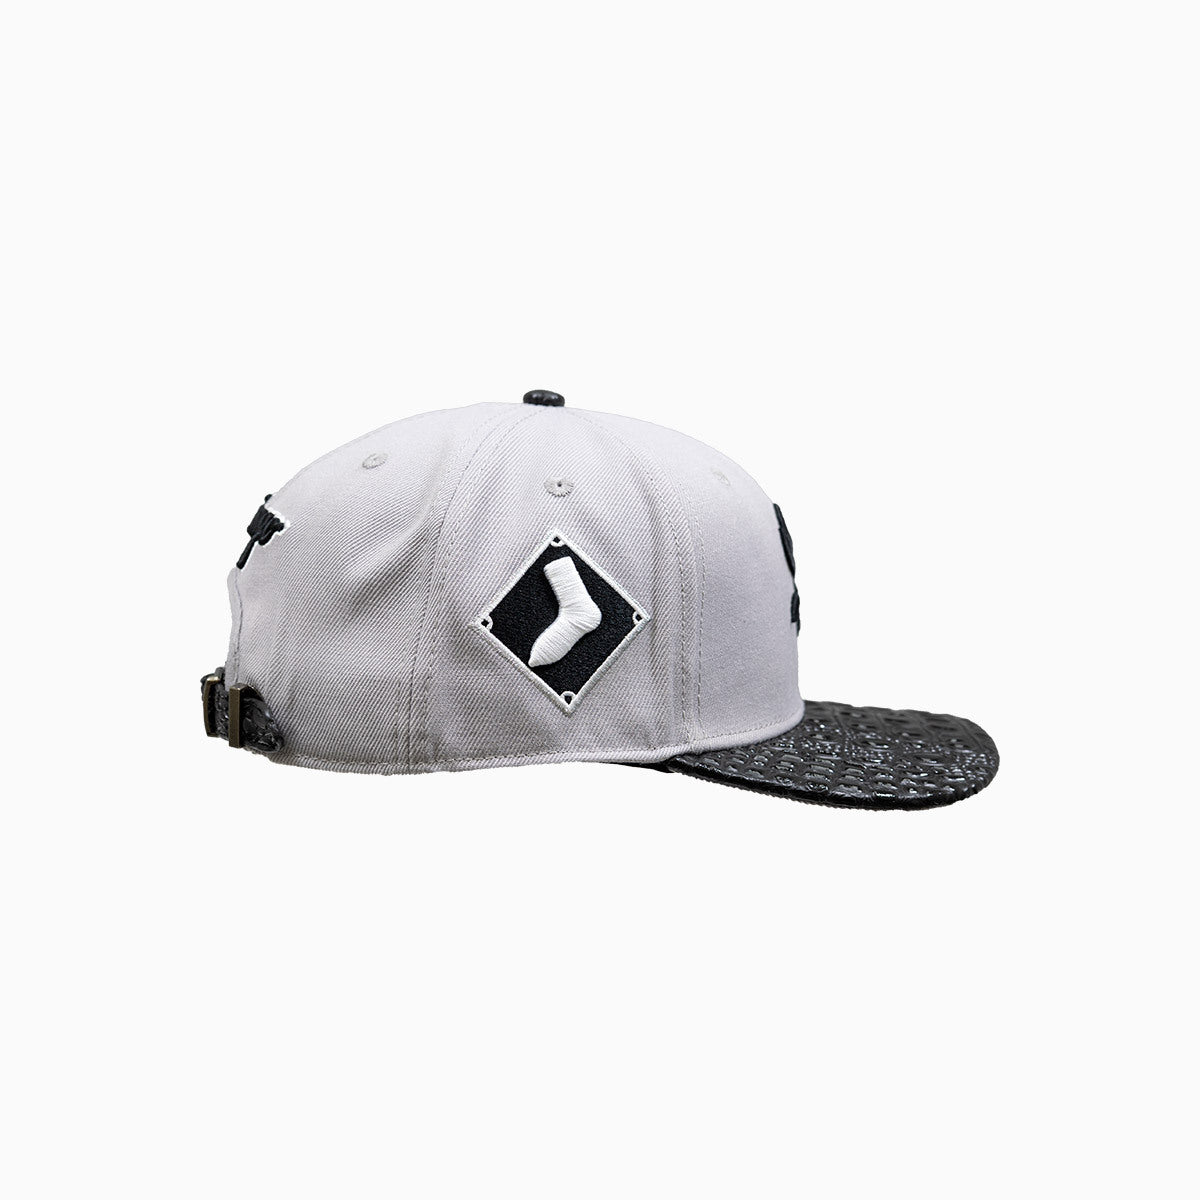 pro-standard-chicago-white-sox-hat-with-leather-visor-lcw736178a1-lgy